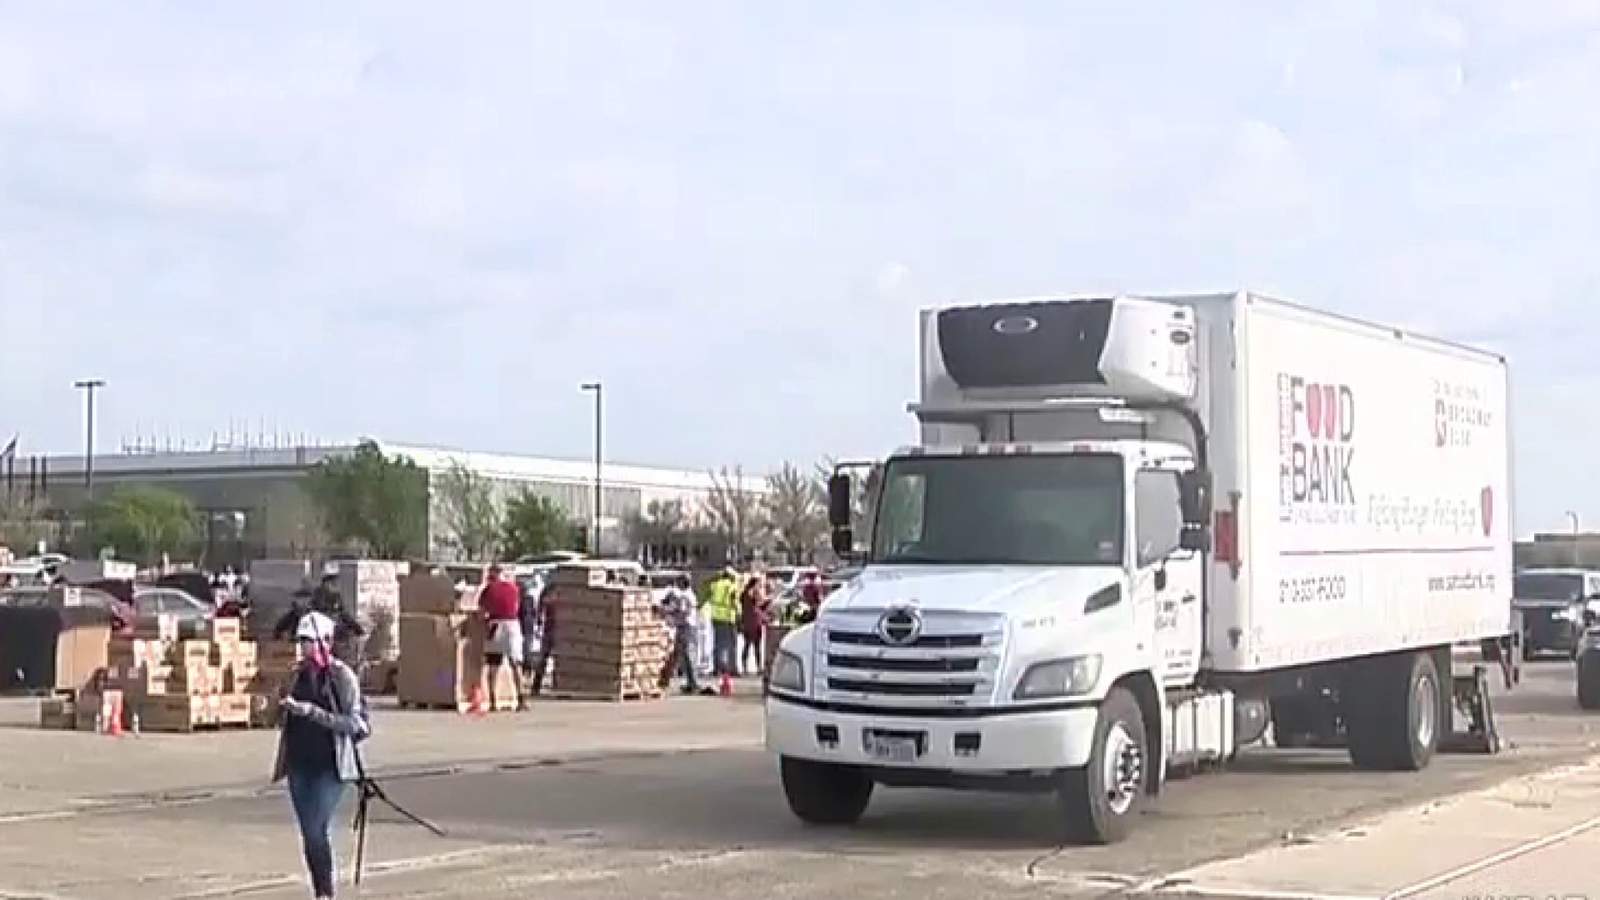 $50,000 donation to San Antonio Food Bank helps keep refrigerated truck on the road